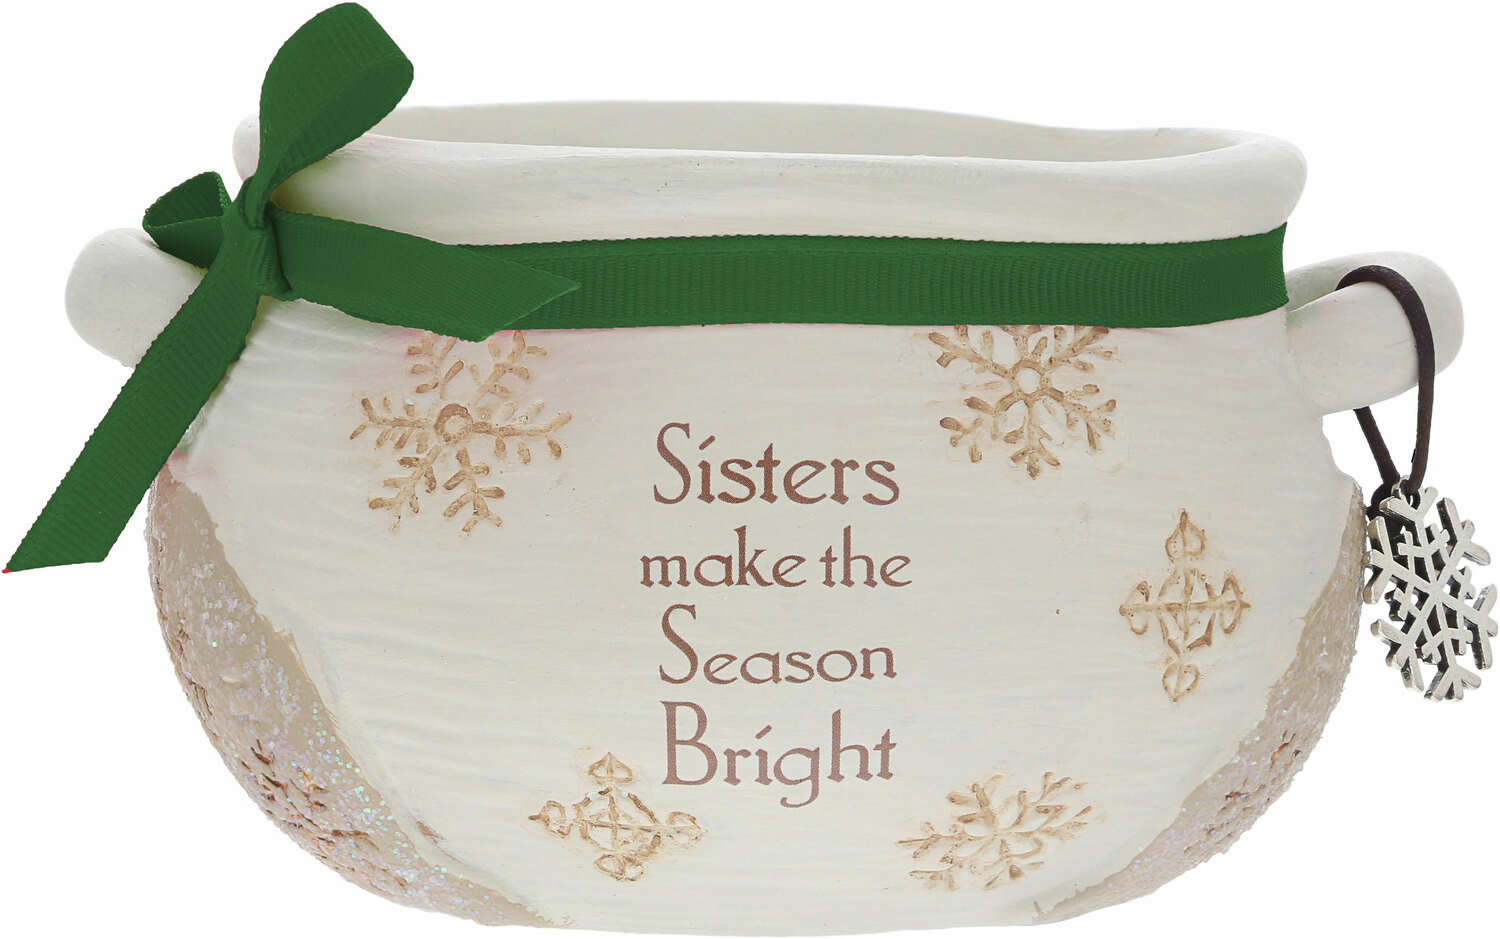 Sisters by The Birchhearts - Sisters - 9 oz - 100% Soy Wax Reveal Candle
Scent: Winter Snow